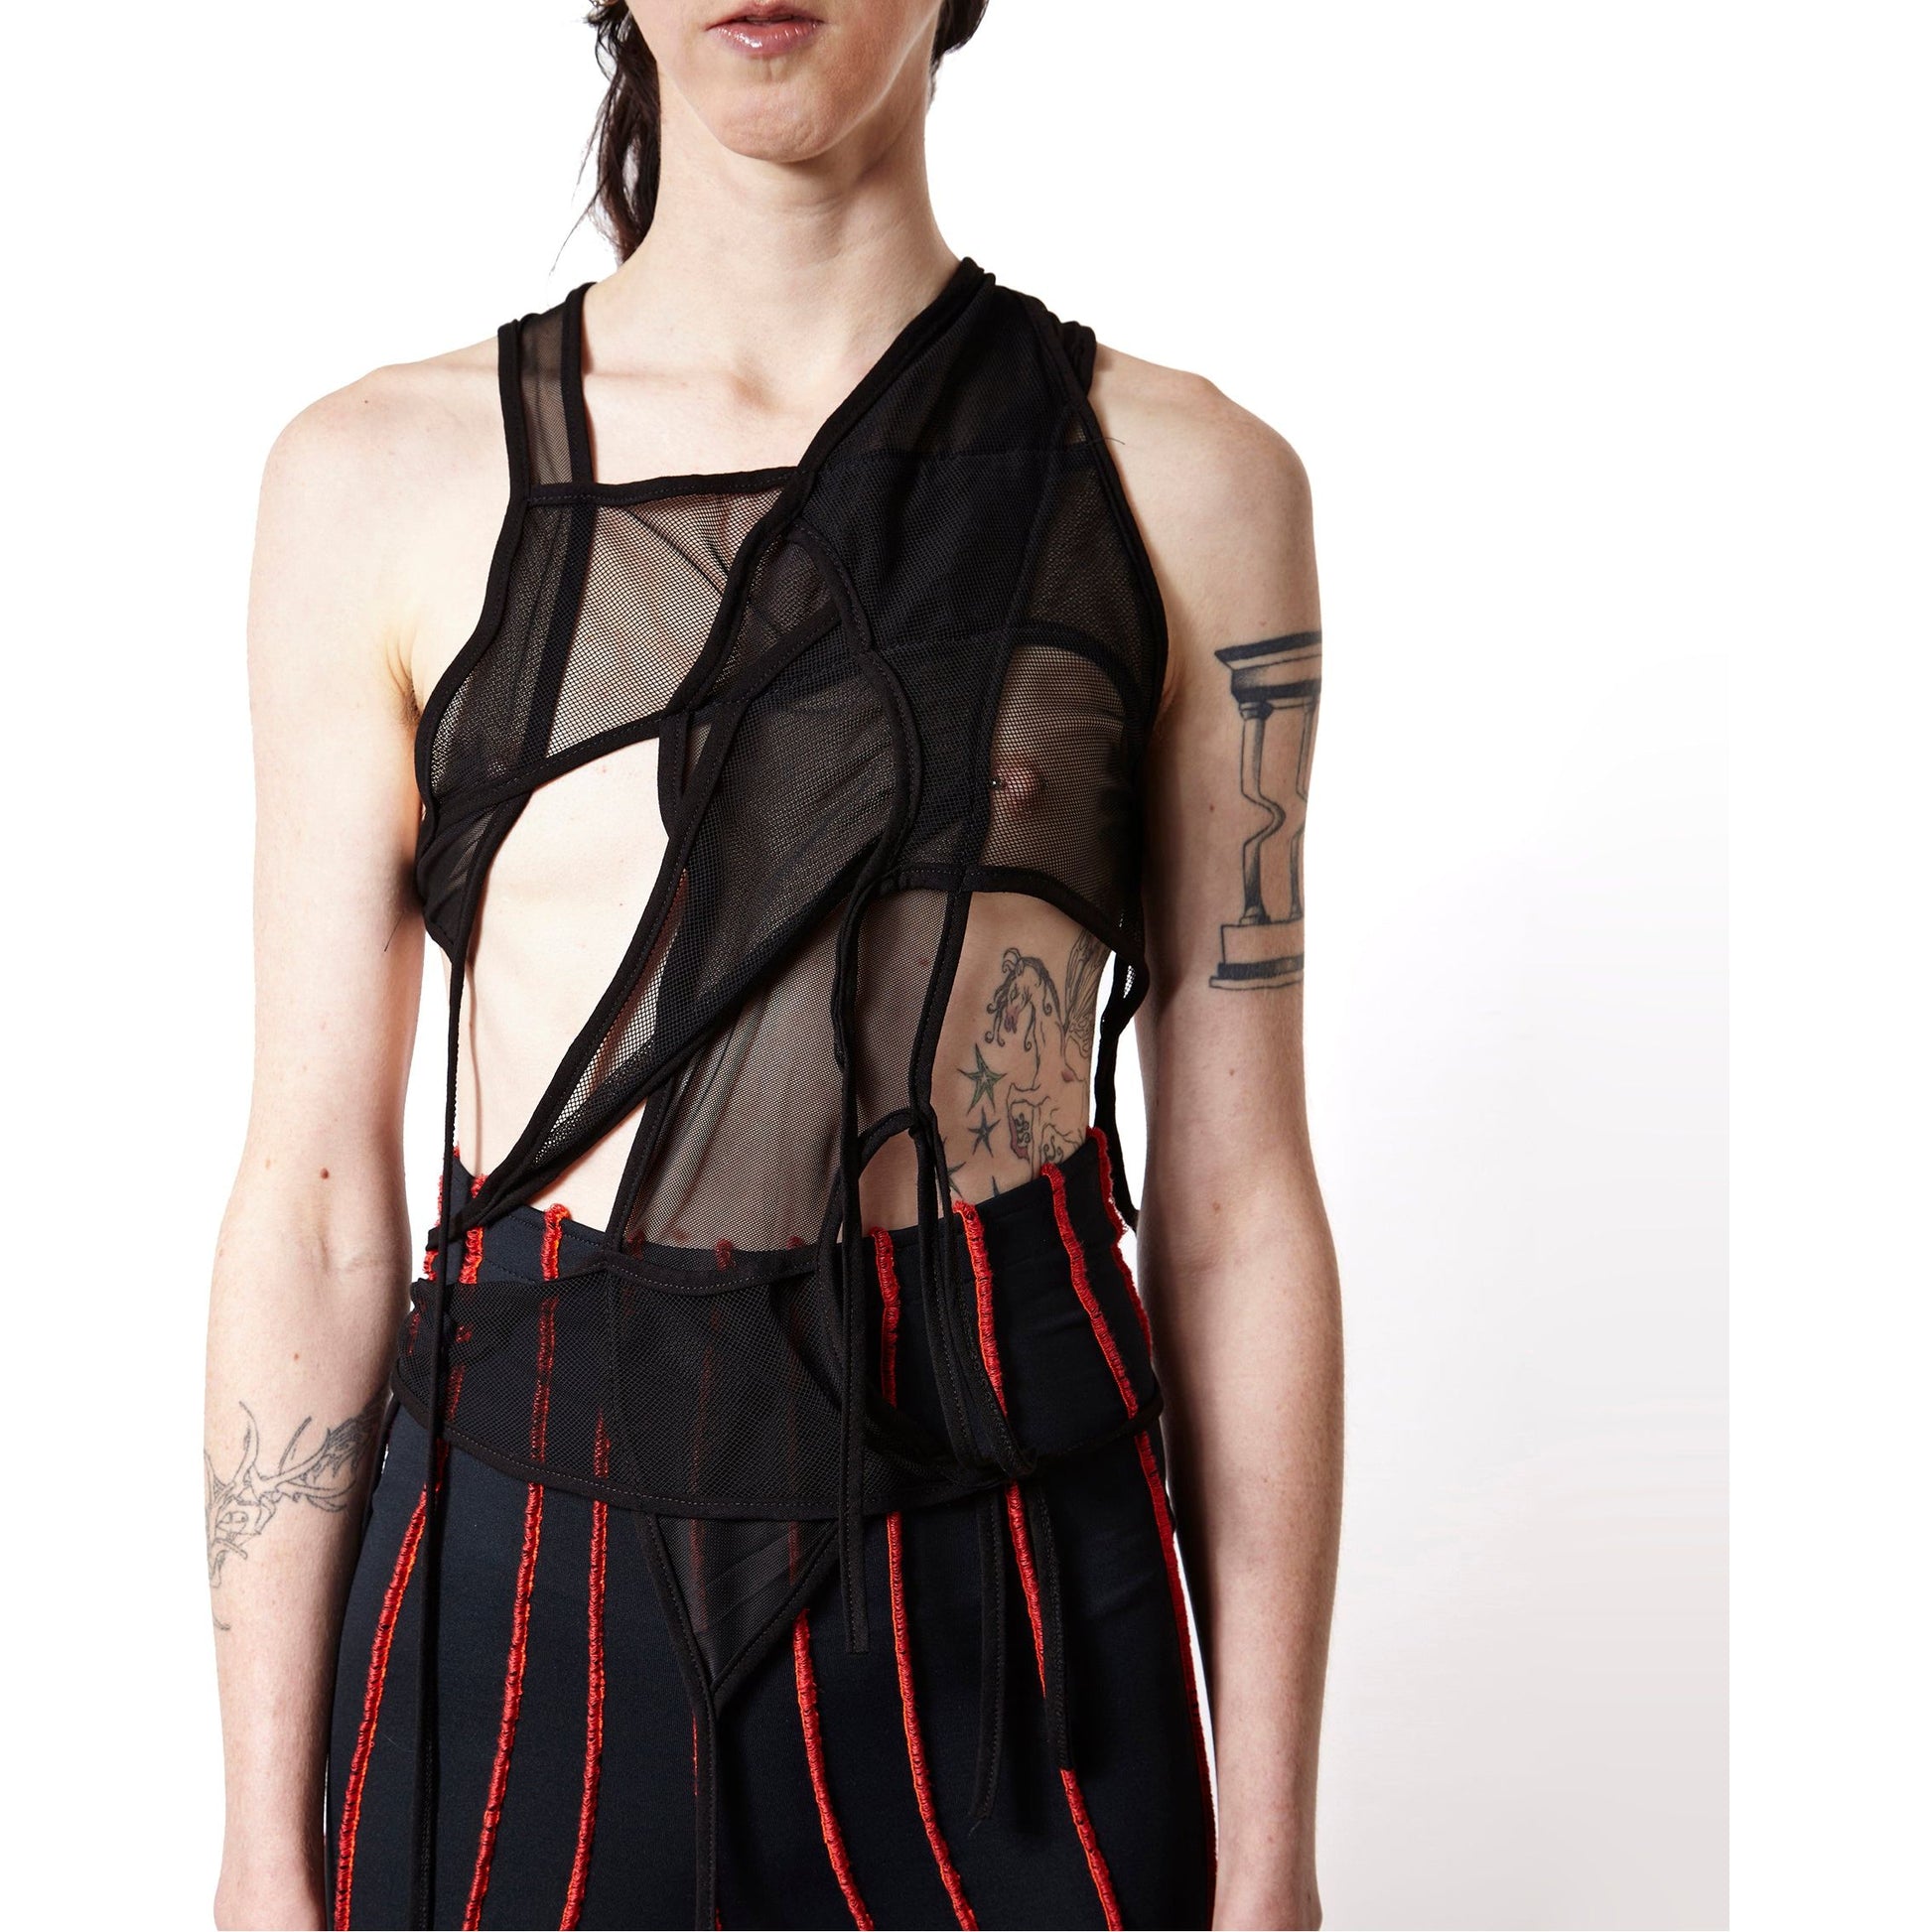 Top deconstructive with 2 mesh fabric in black color and bies in jersey,